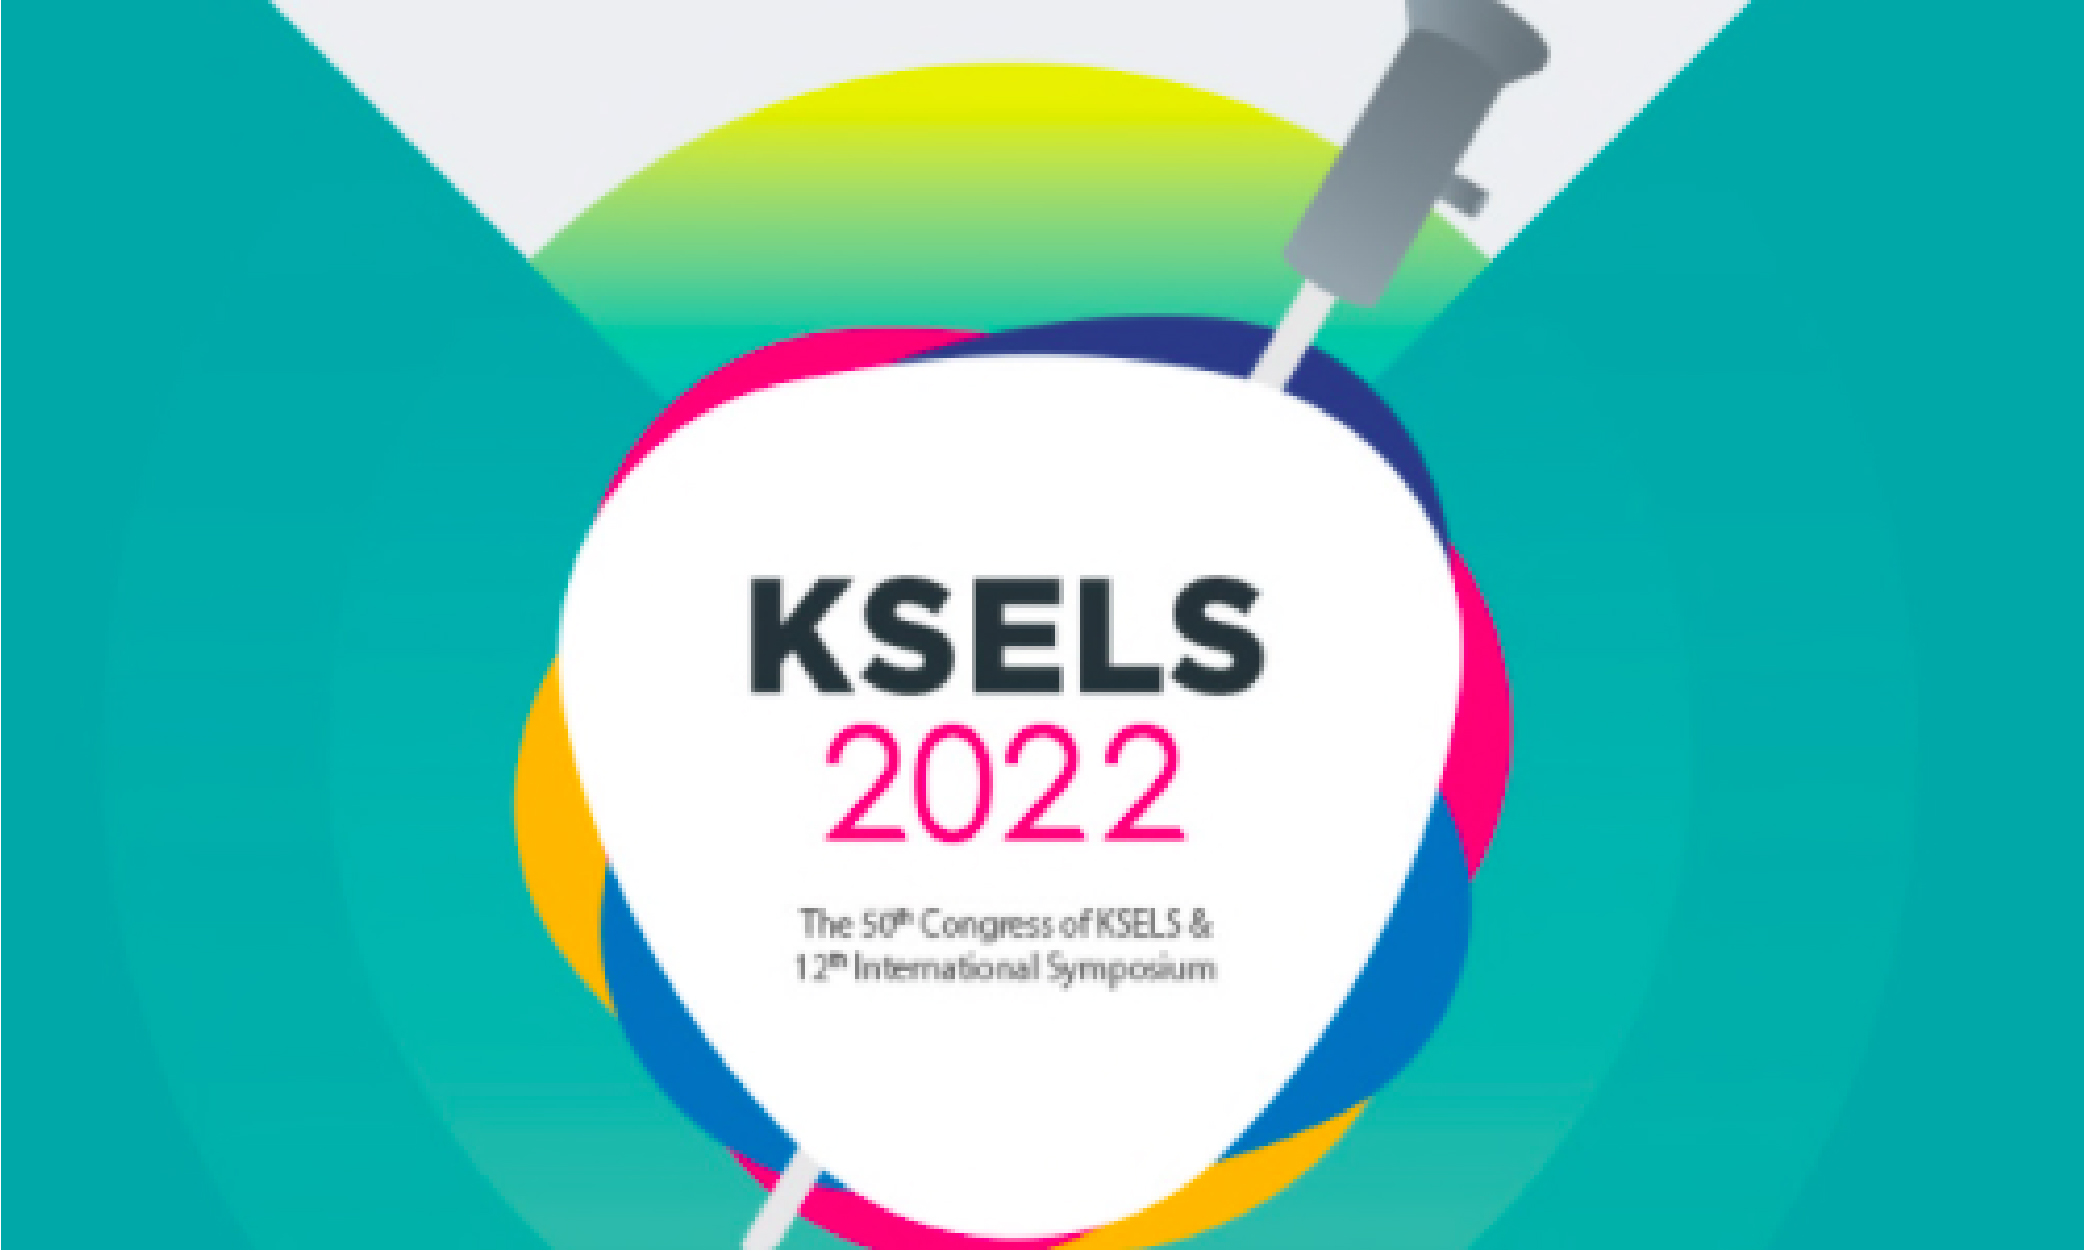 50th Congress of KSELS & 12th International Symposium (KSELS 2022)